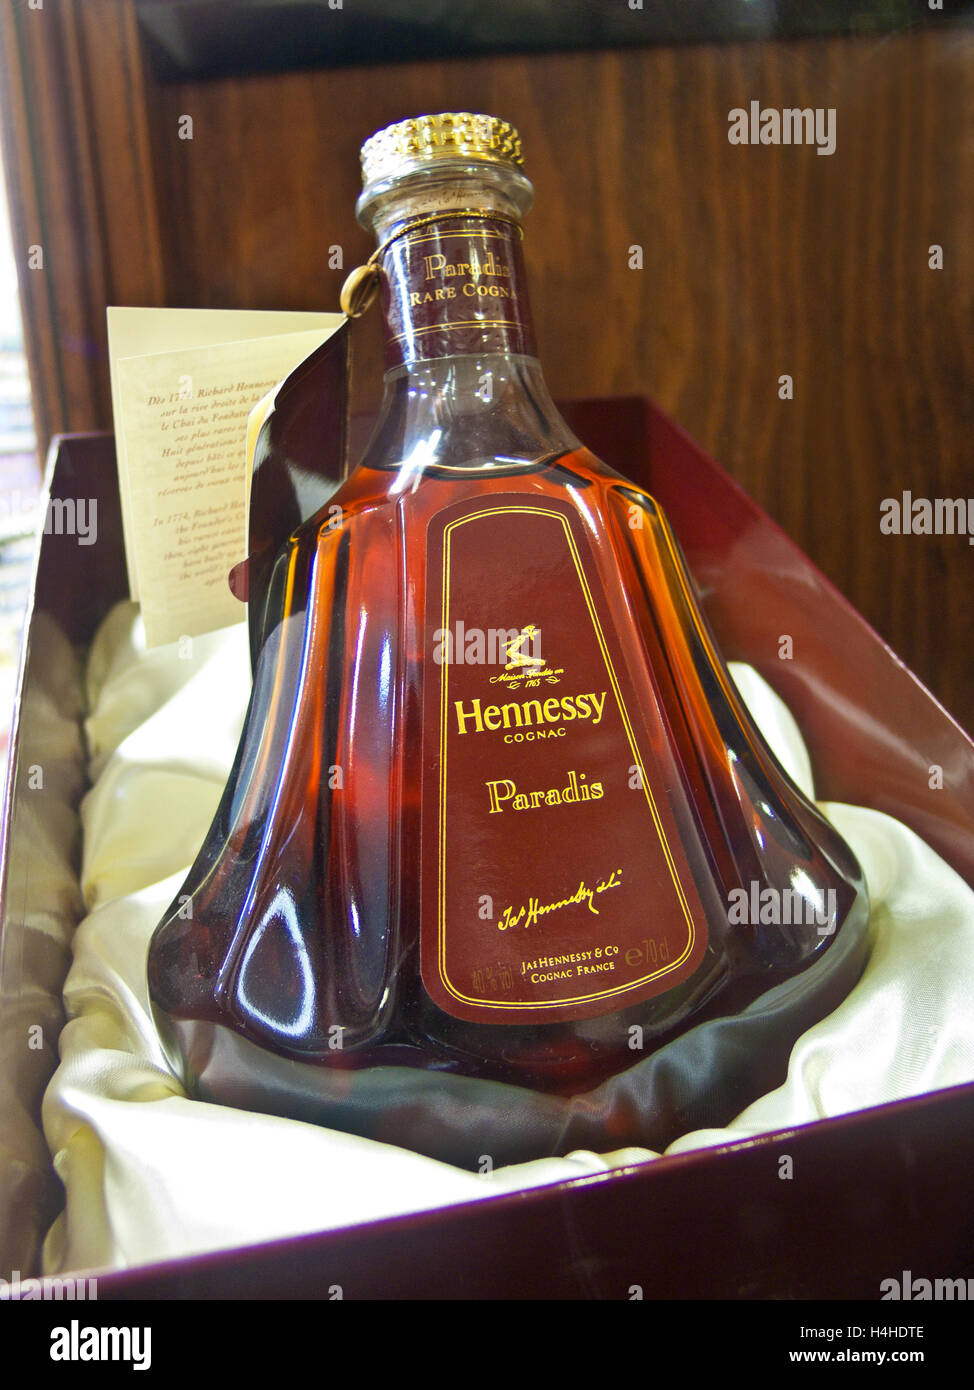 Rare expensive Hennessy 'Paradis' Cognac bottle on display. A blend of over one hundred very old 'eaux-de-vie' from Cognac's finest growing regions. Stock Photo